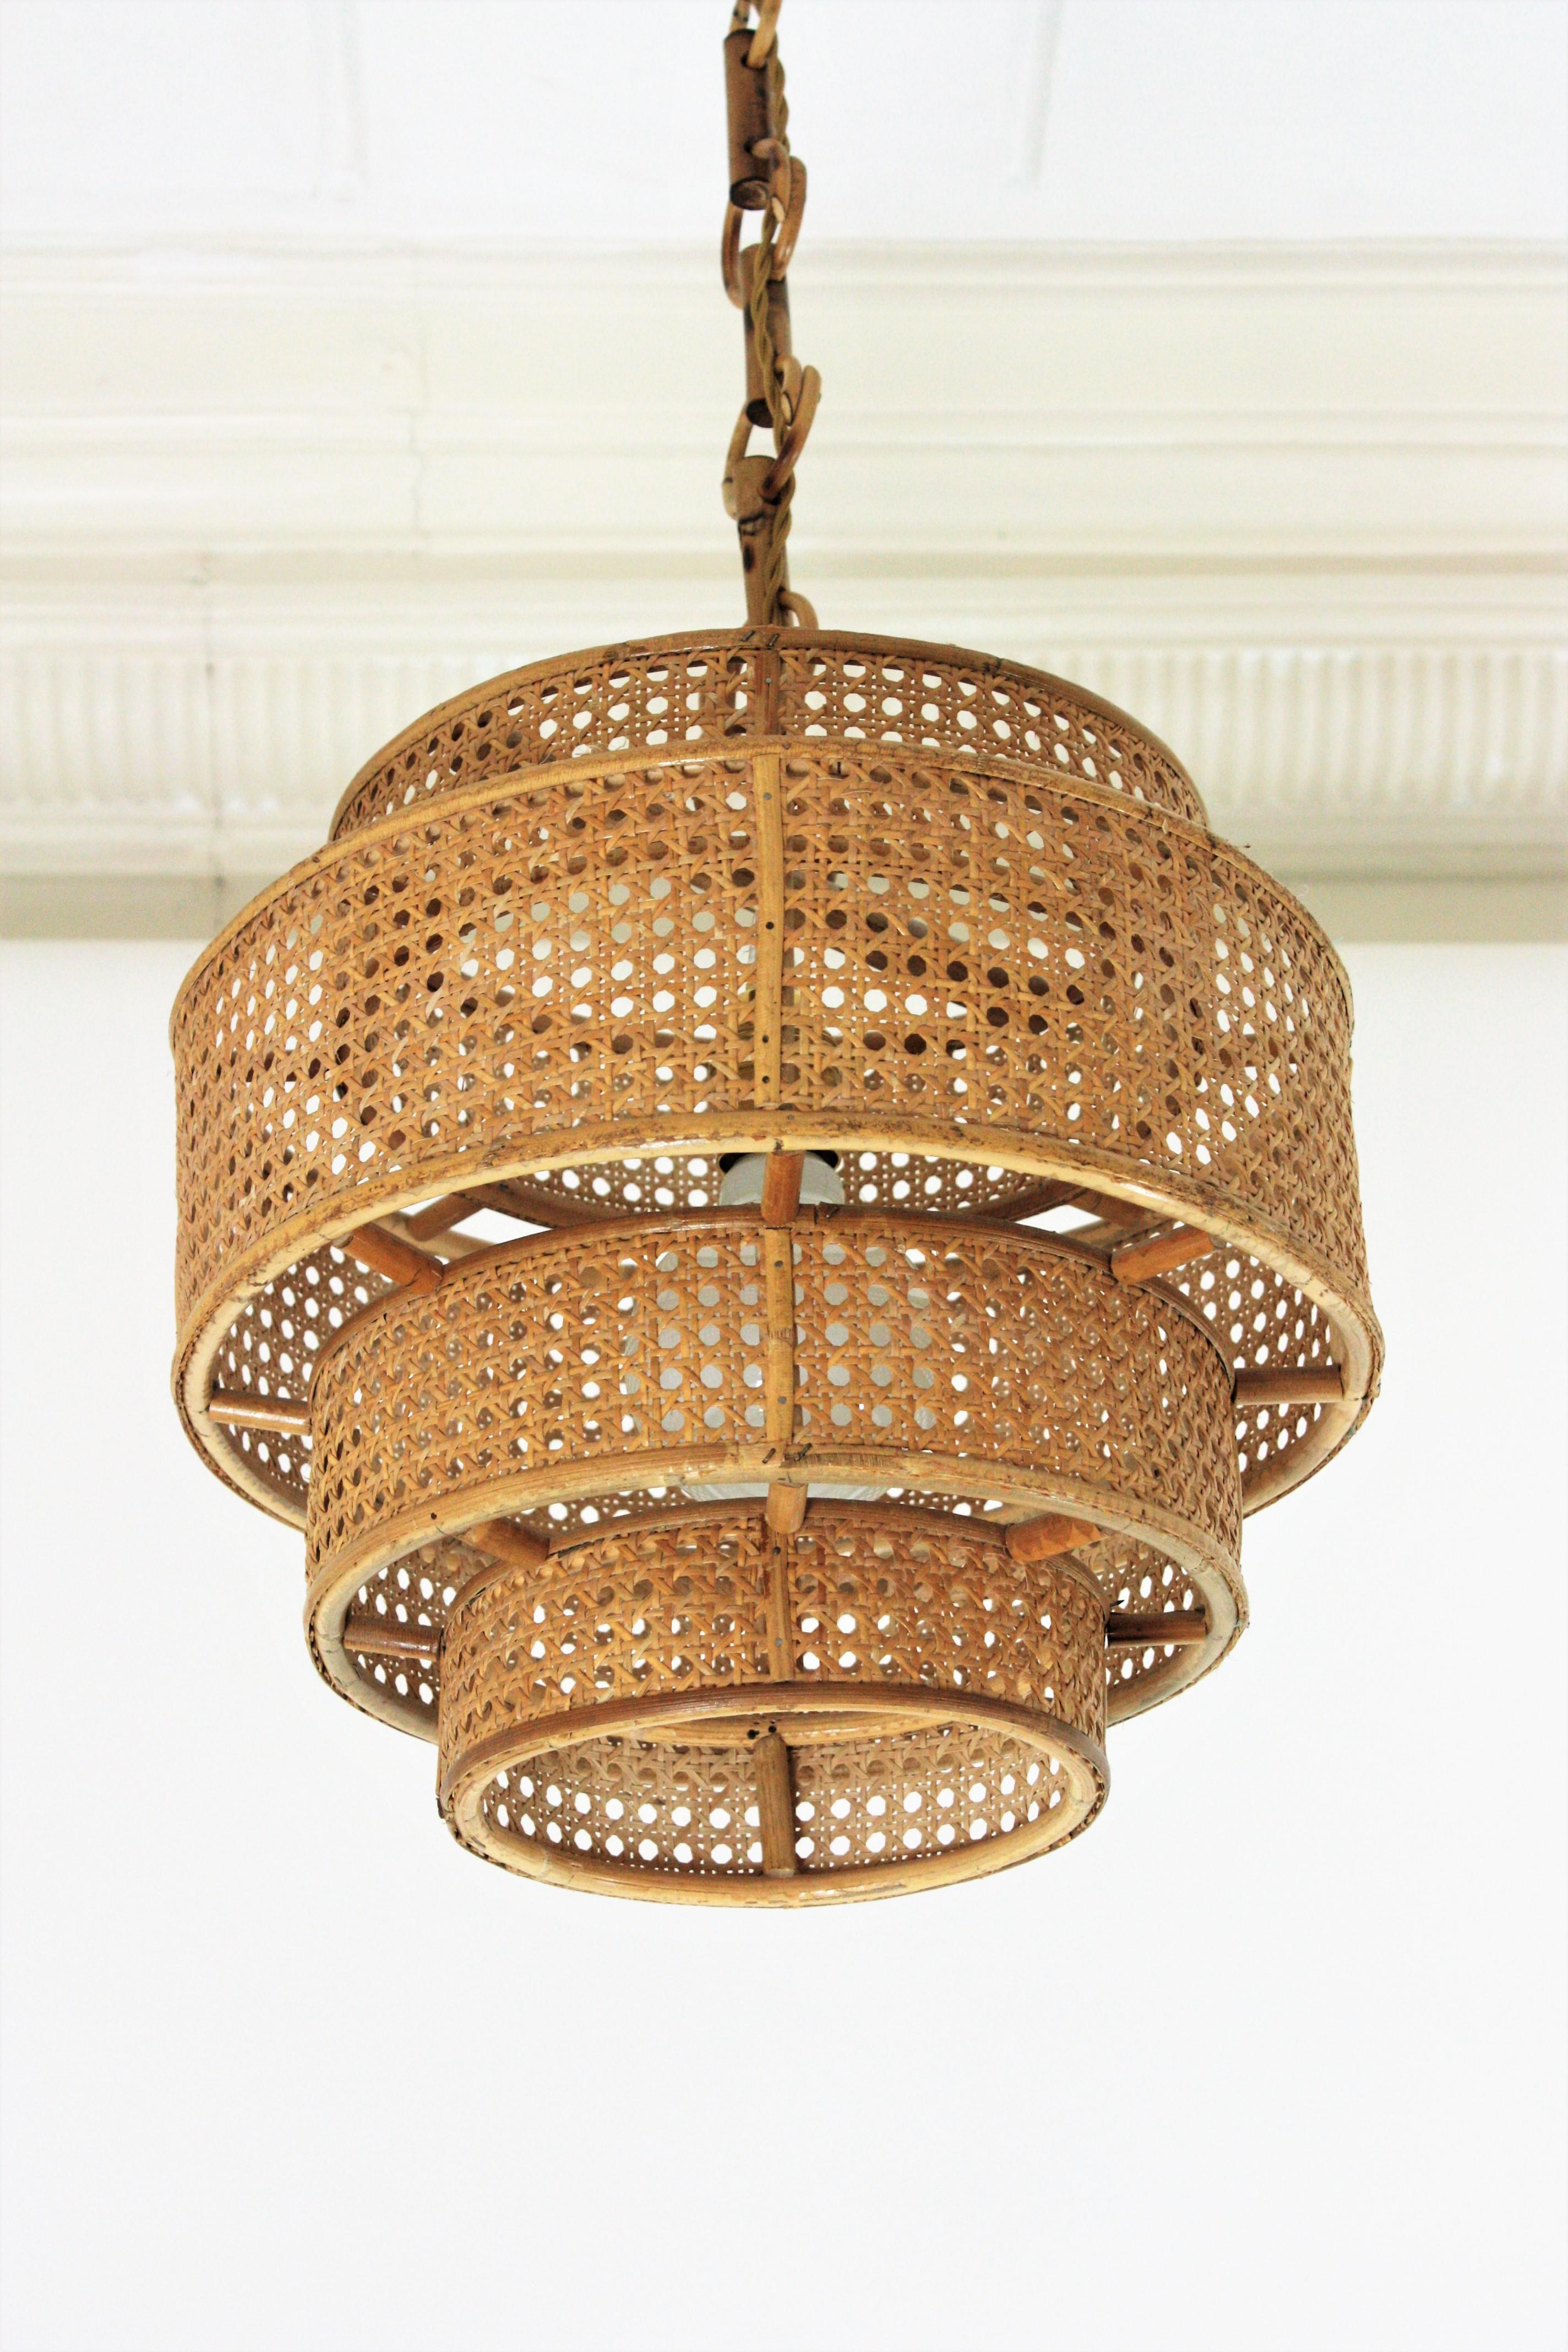  Rattan Wicker Weave Concentric Cylinder Pendant Hanging Light  For Sale 1